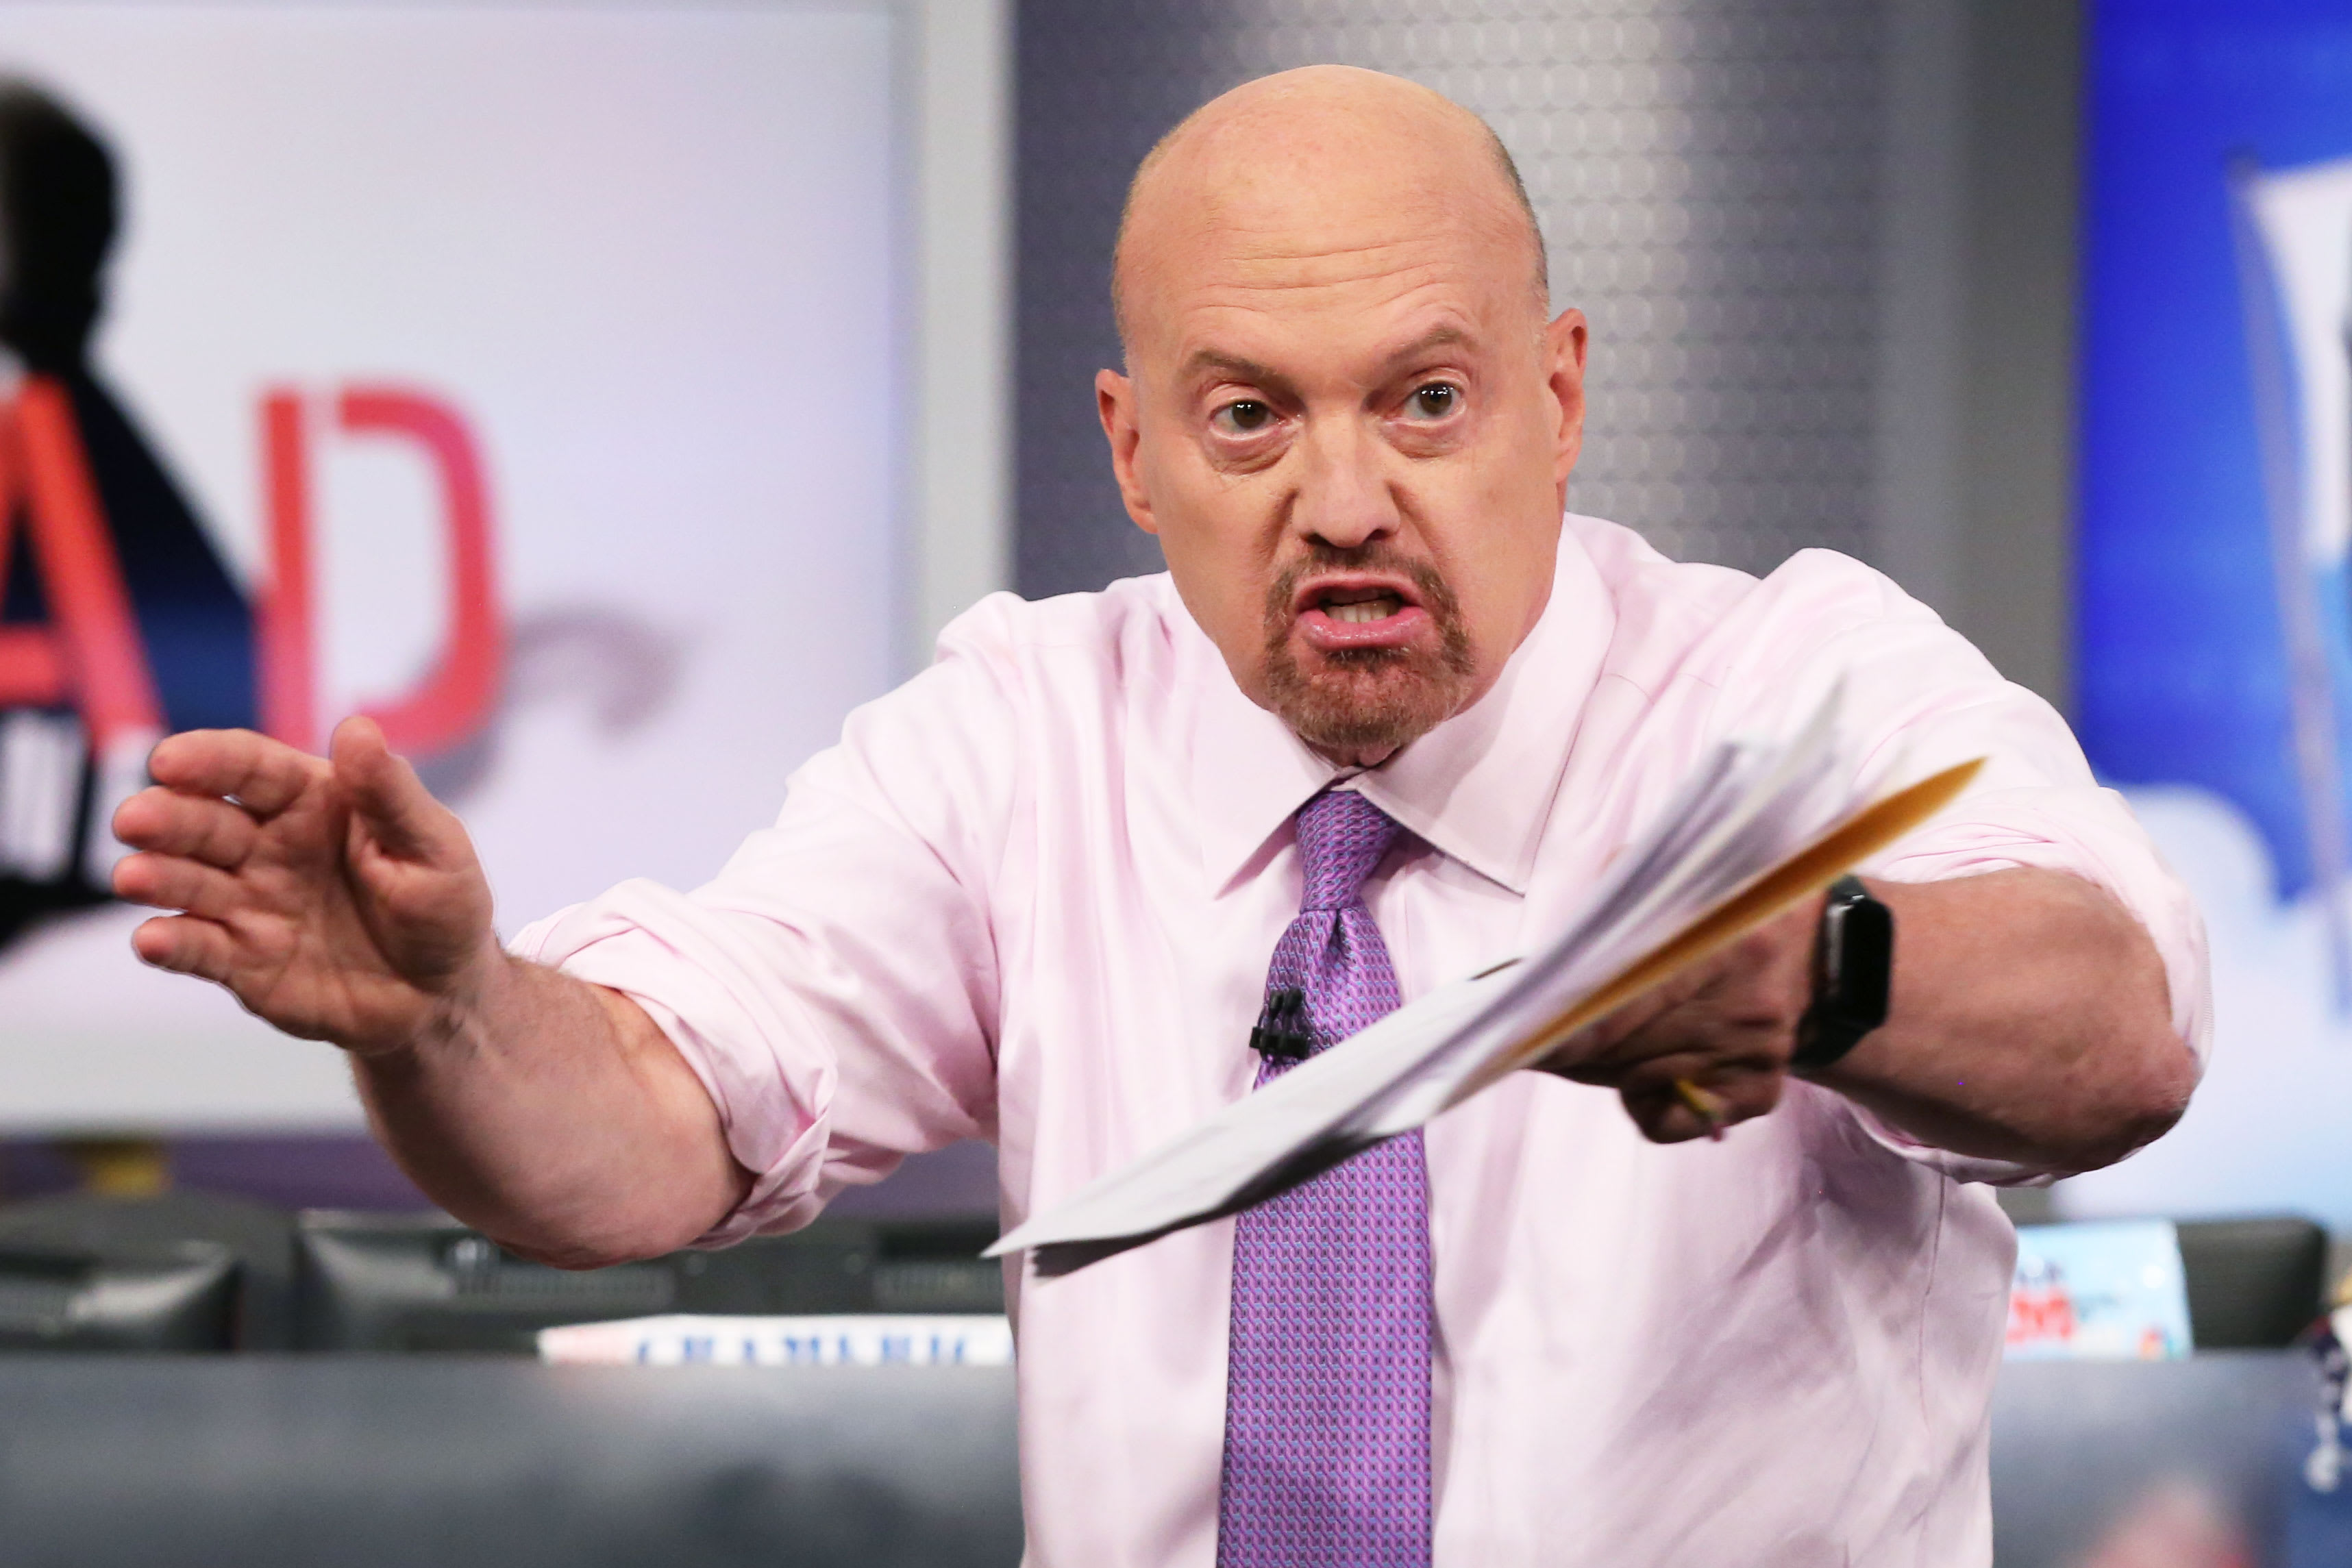 These are the stocks CNBC's Jim Cramer thinks you should buy right now